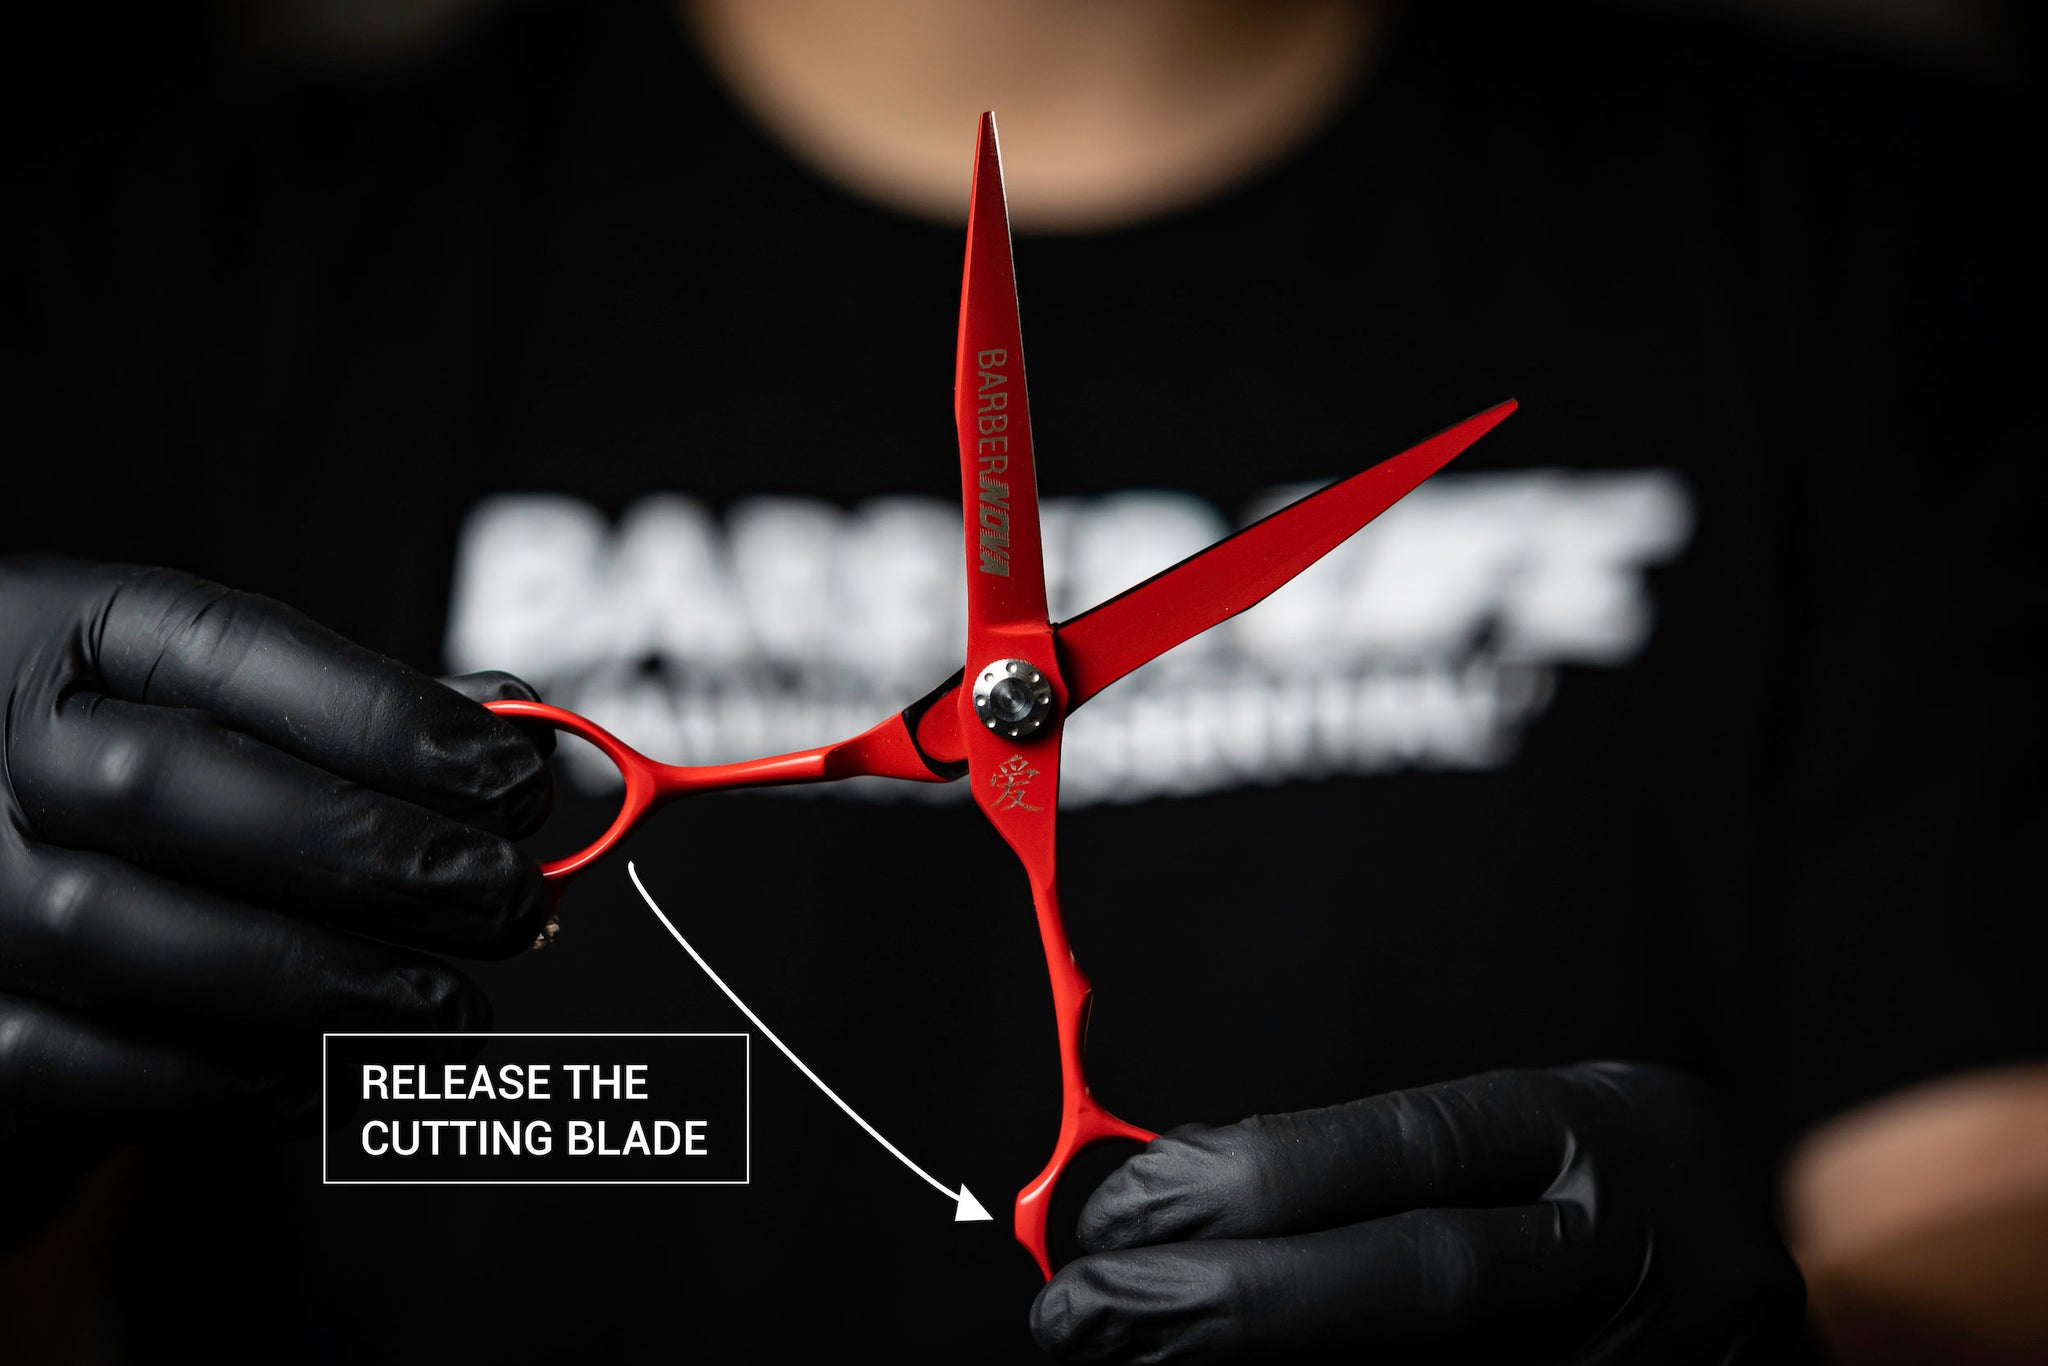 how to get the perfect shear tension, calibrating your shears